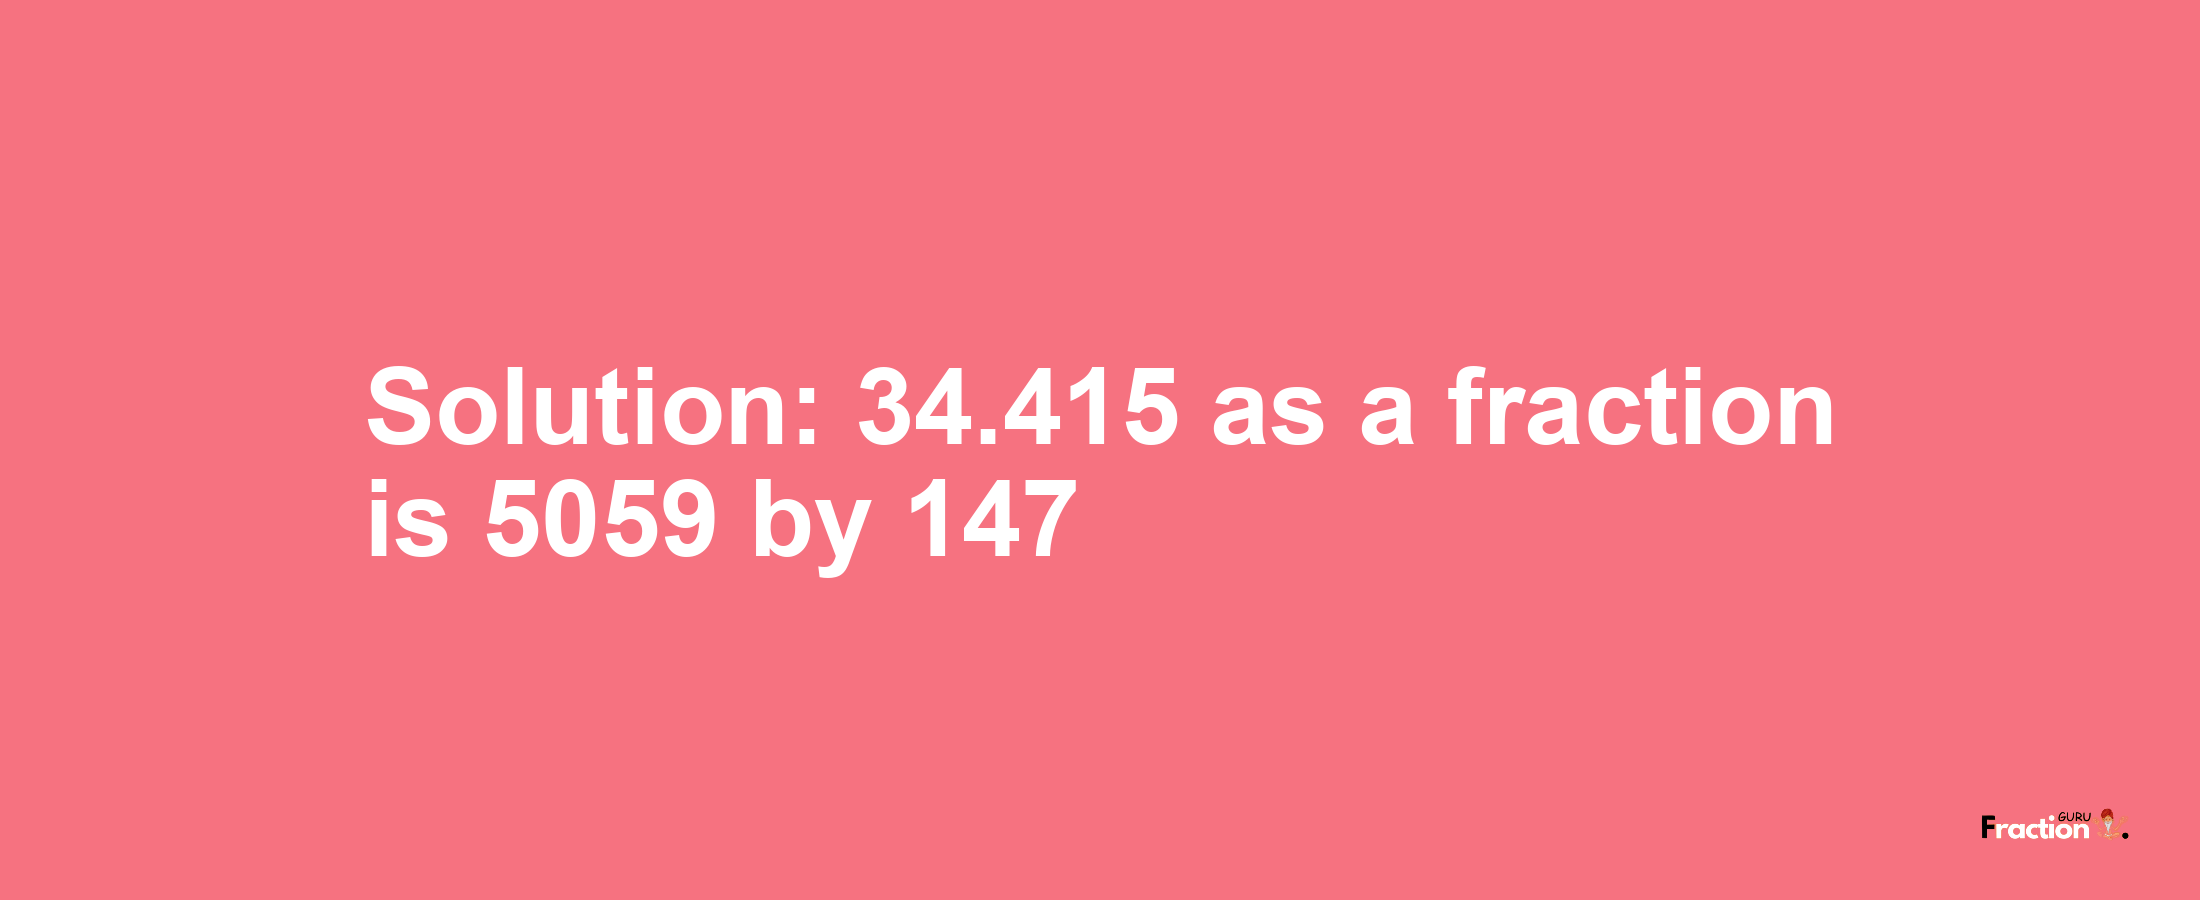 Solution:34.415 as a fraction is 5059/147